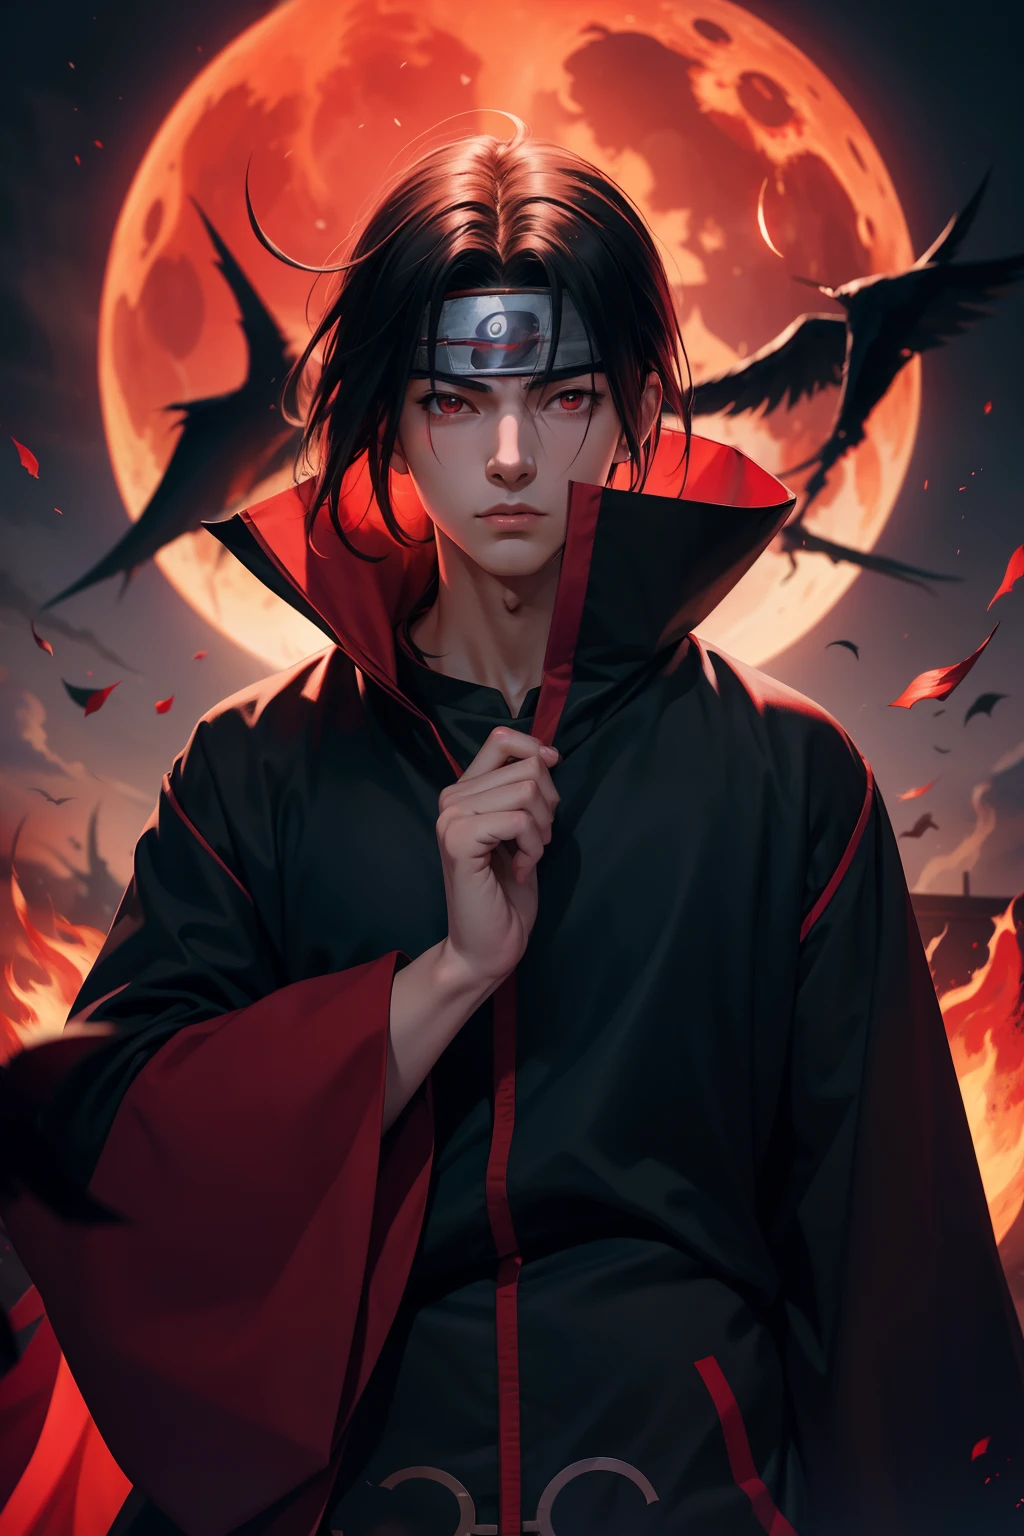 Masterpiece, high detailed, a young man covered in black cape with red cloud drawing or akatsuki robe from naruto, itachi uchiha, red eyes, upper body, shinobi, Konoha headband, red moon in the background, red theme, from naruto, long hair, covered in red flame